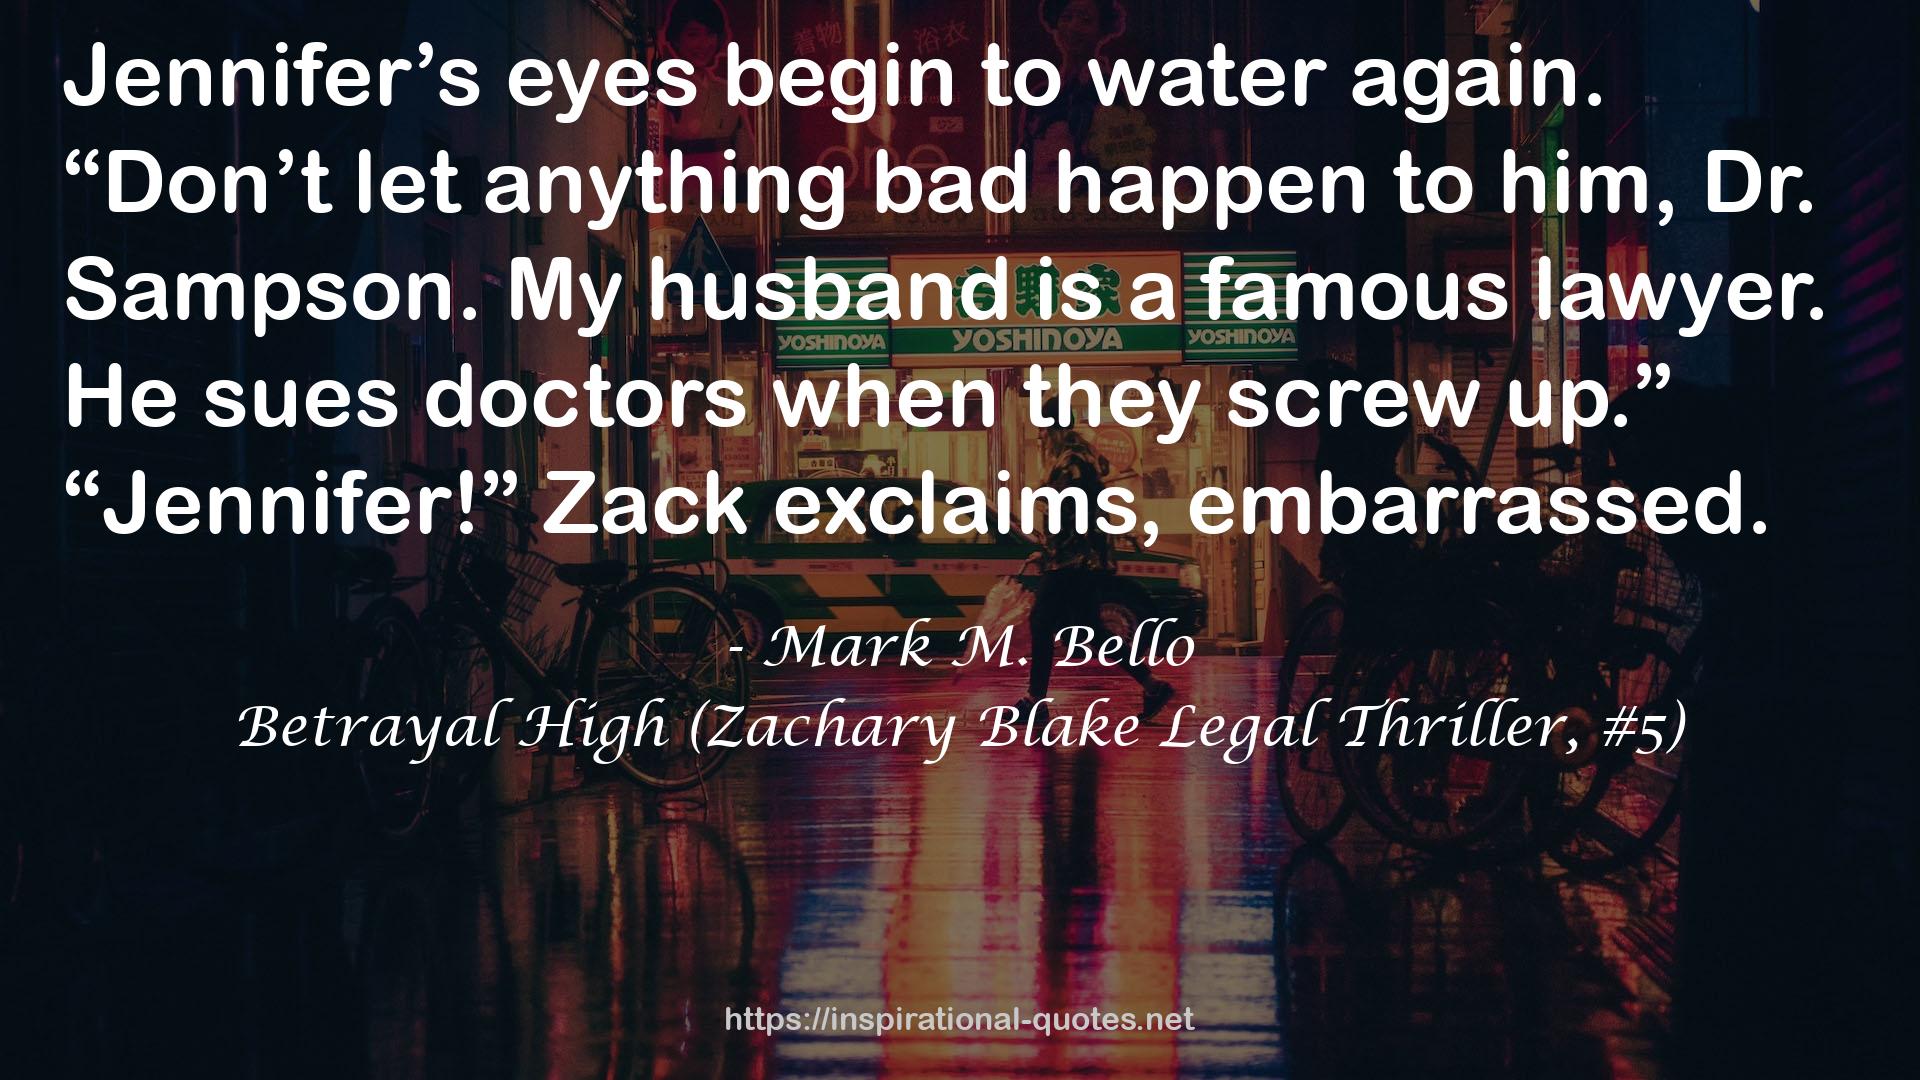 Betrayal High (Zachary Blake Legal Thriller, #5) QUOTES